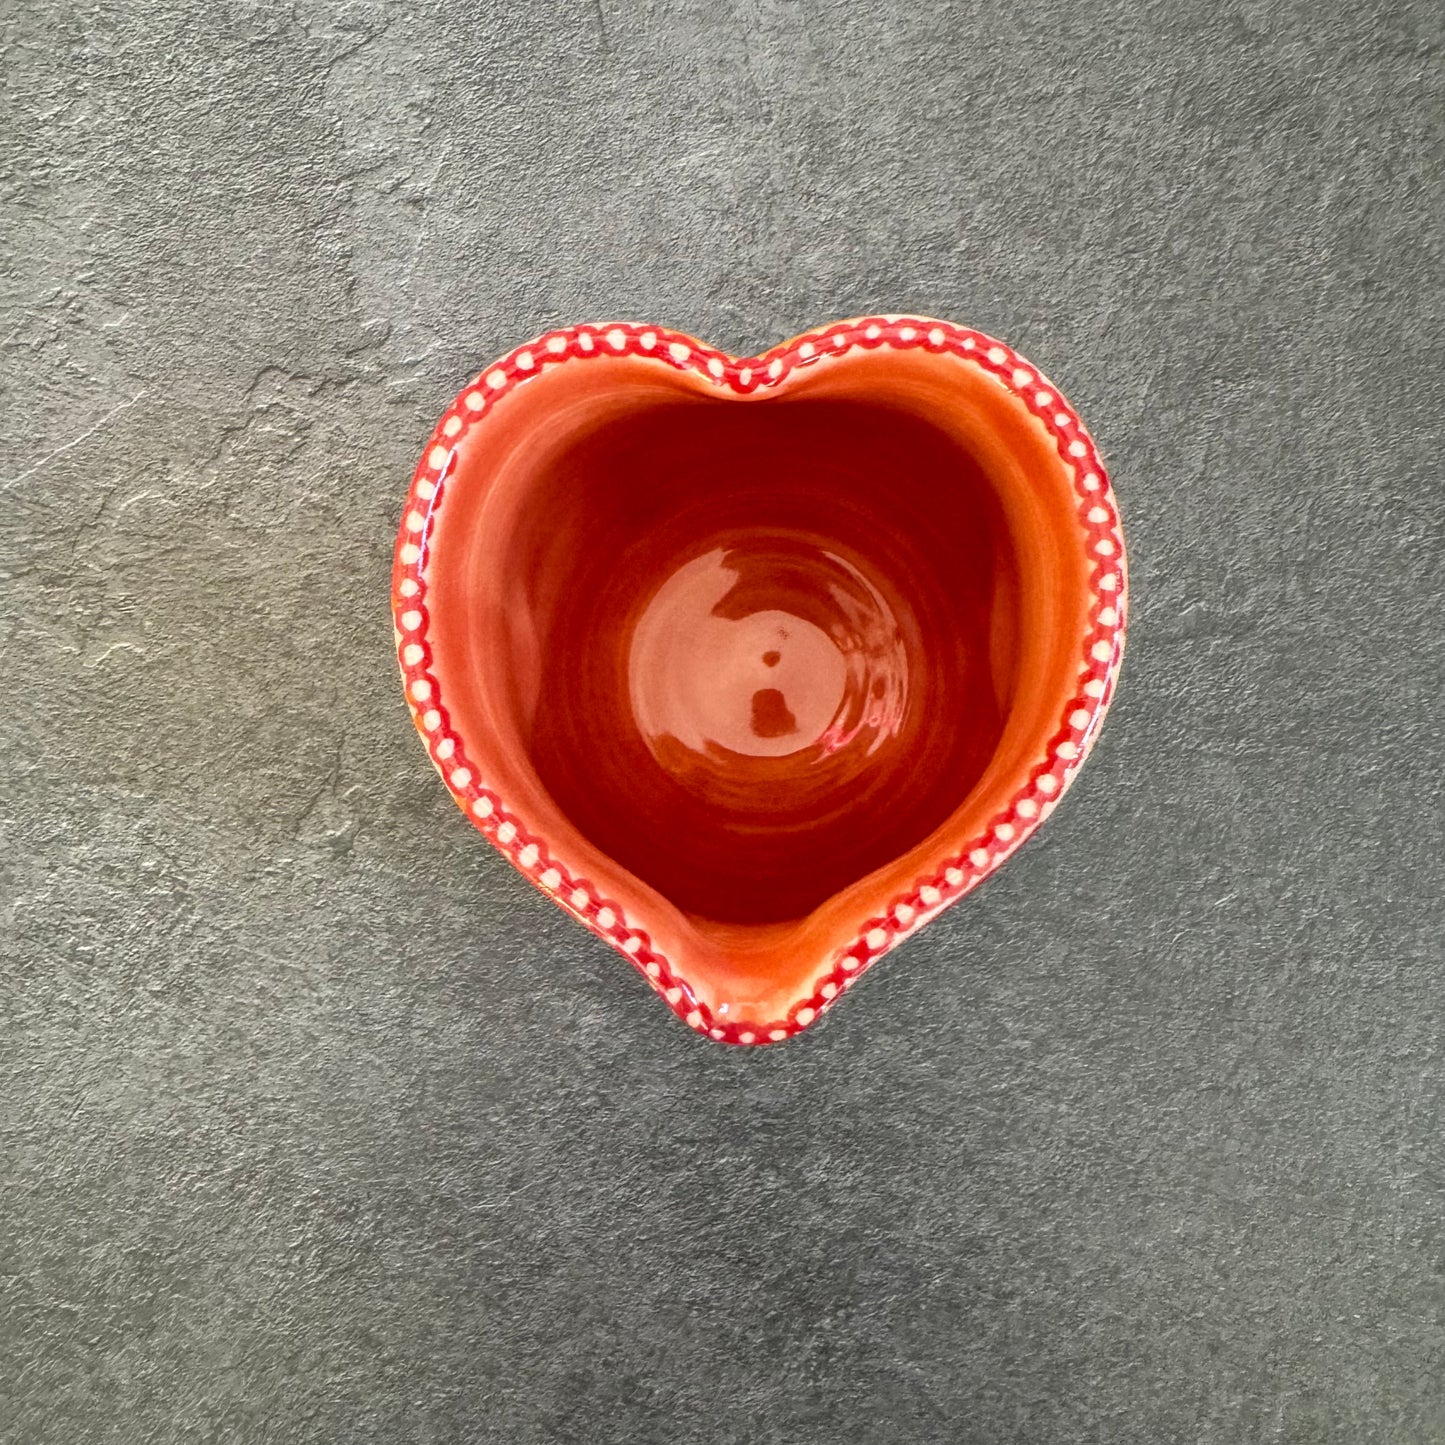 Heart Cup with Black Geometric Design